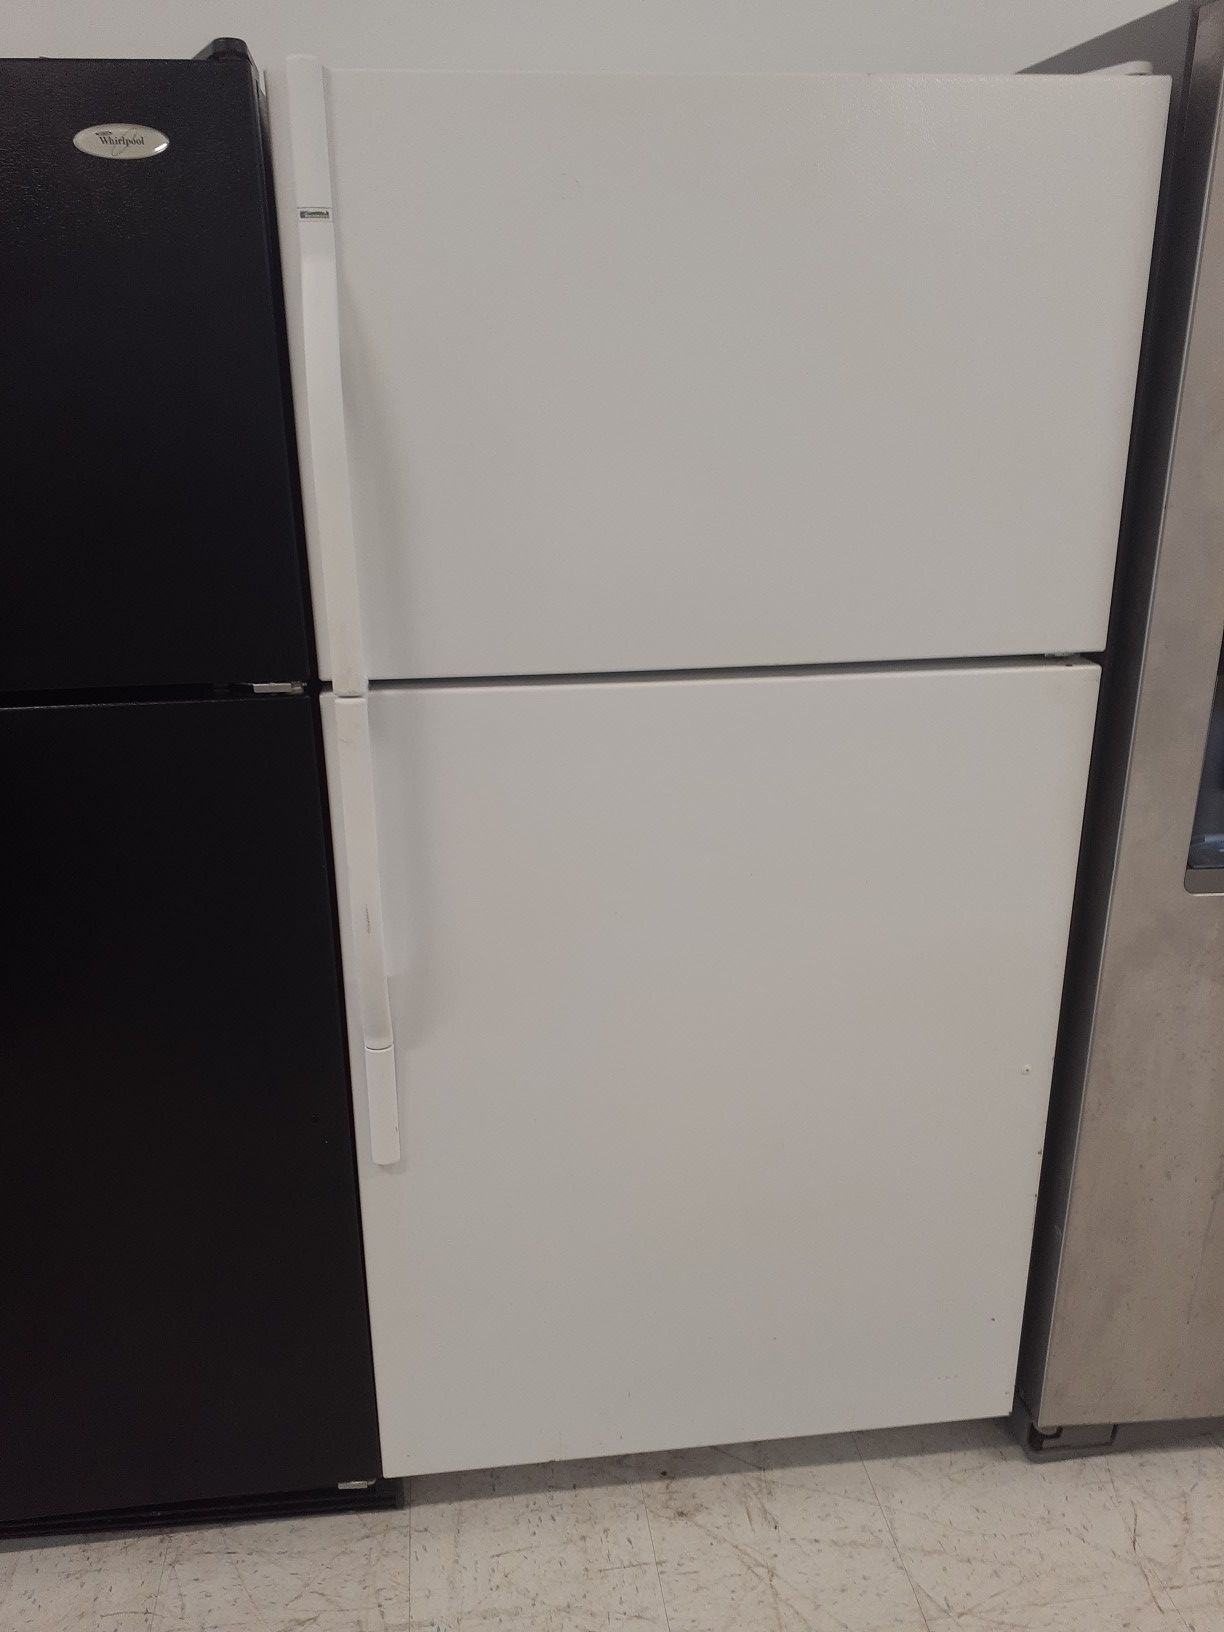 Kenmore top freezer refrigerator used in good condition with 90 day's warranty